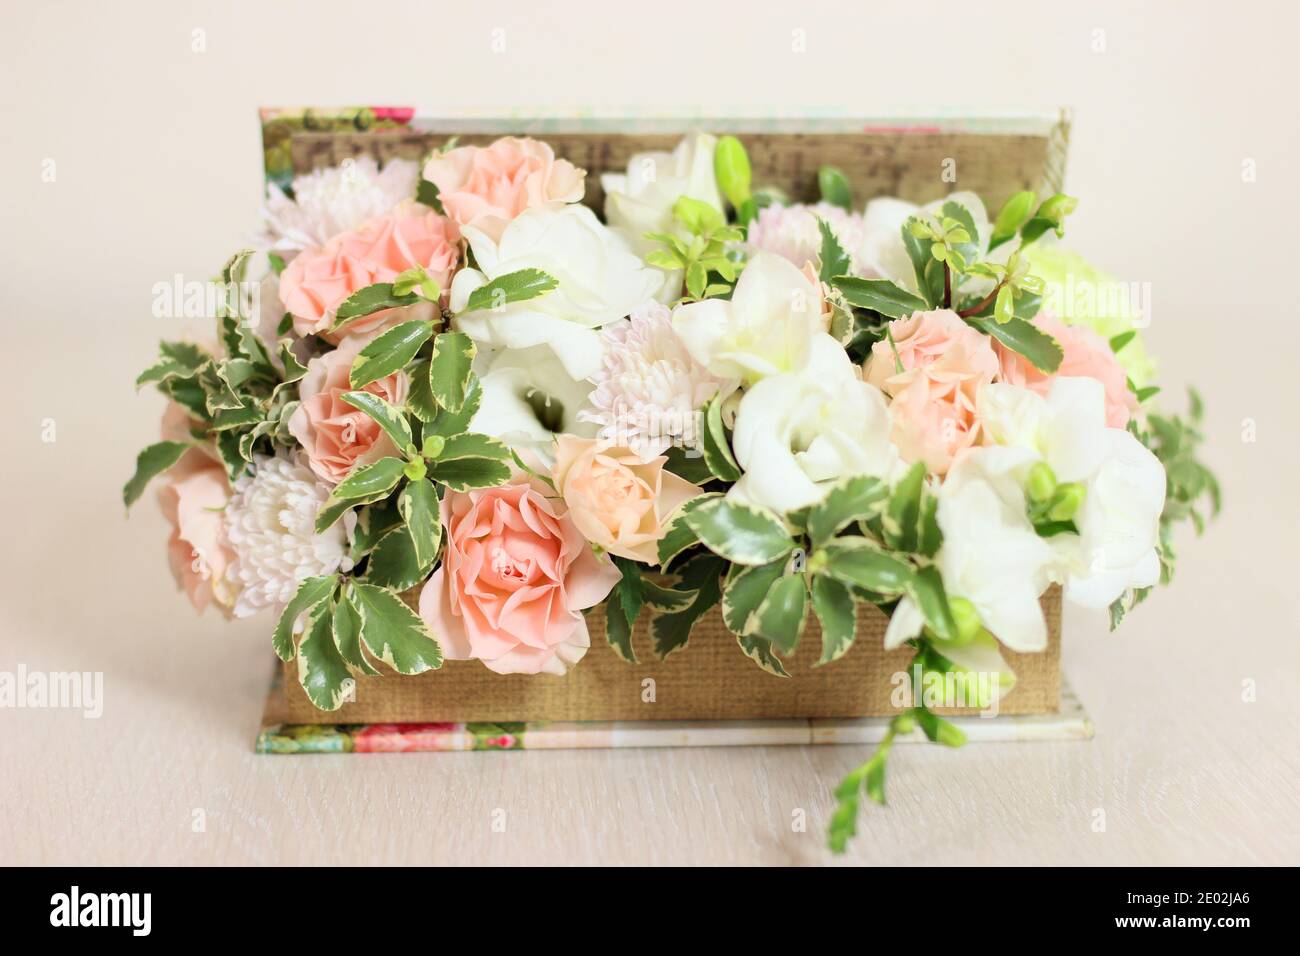 Flower box with white freesia, peach roses, light greens. Fluffy, floral birthday present or other celebration. Stock Photo